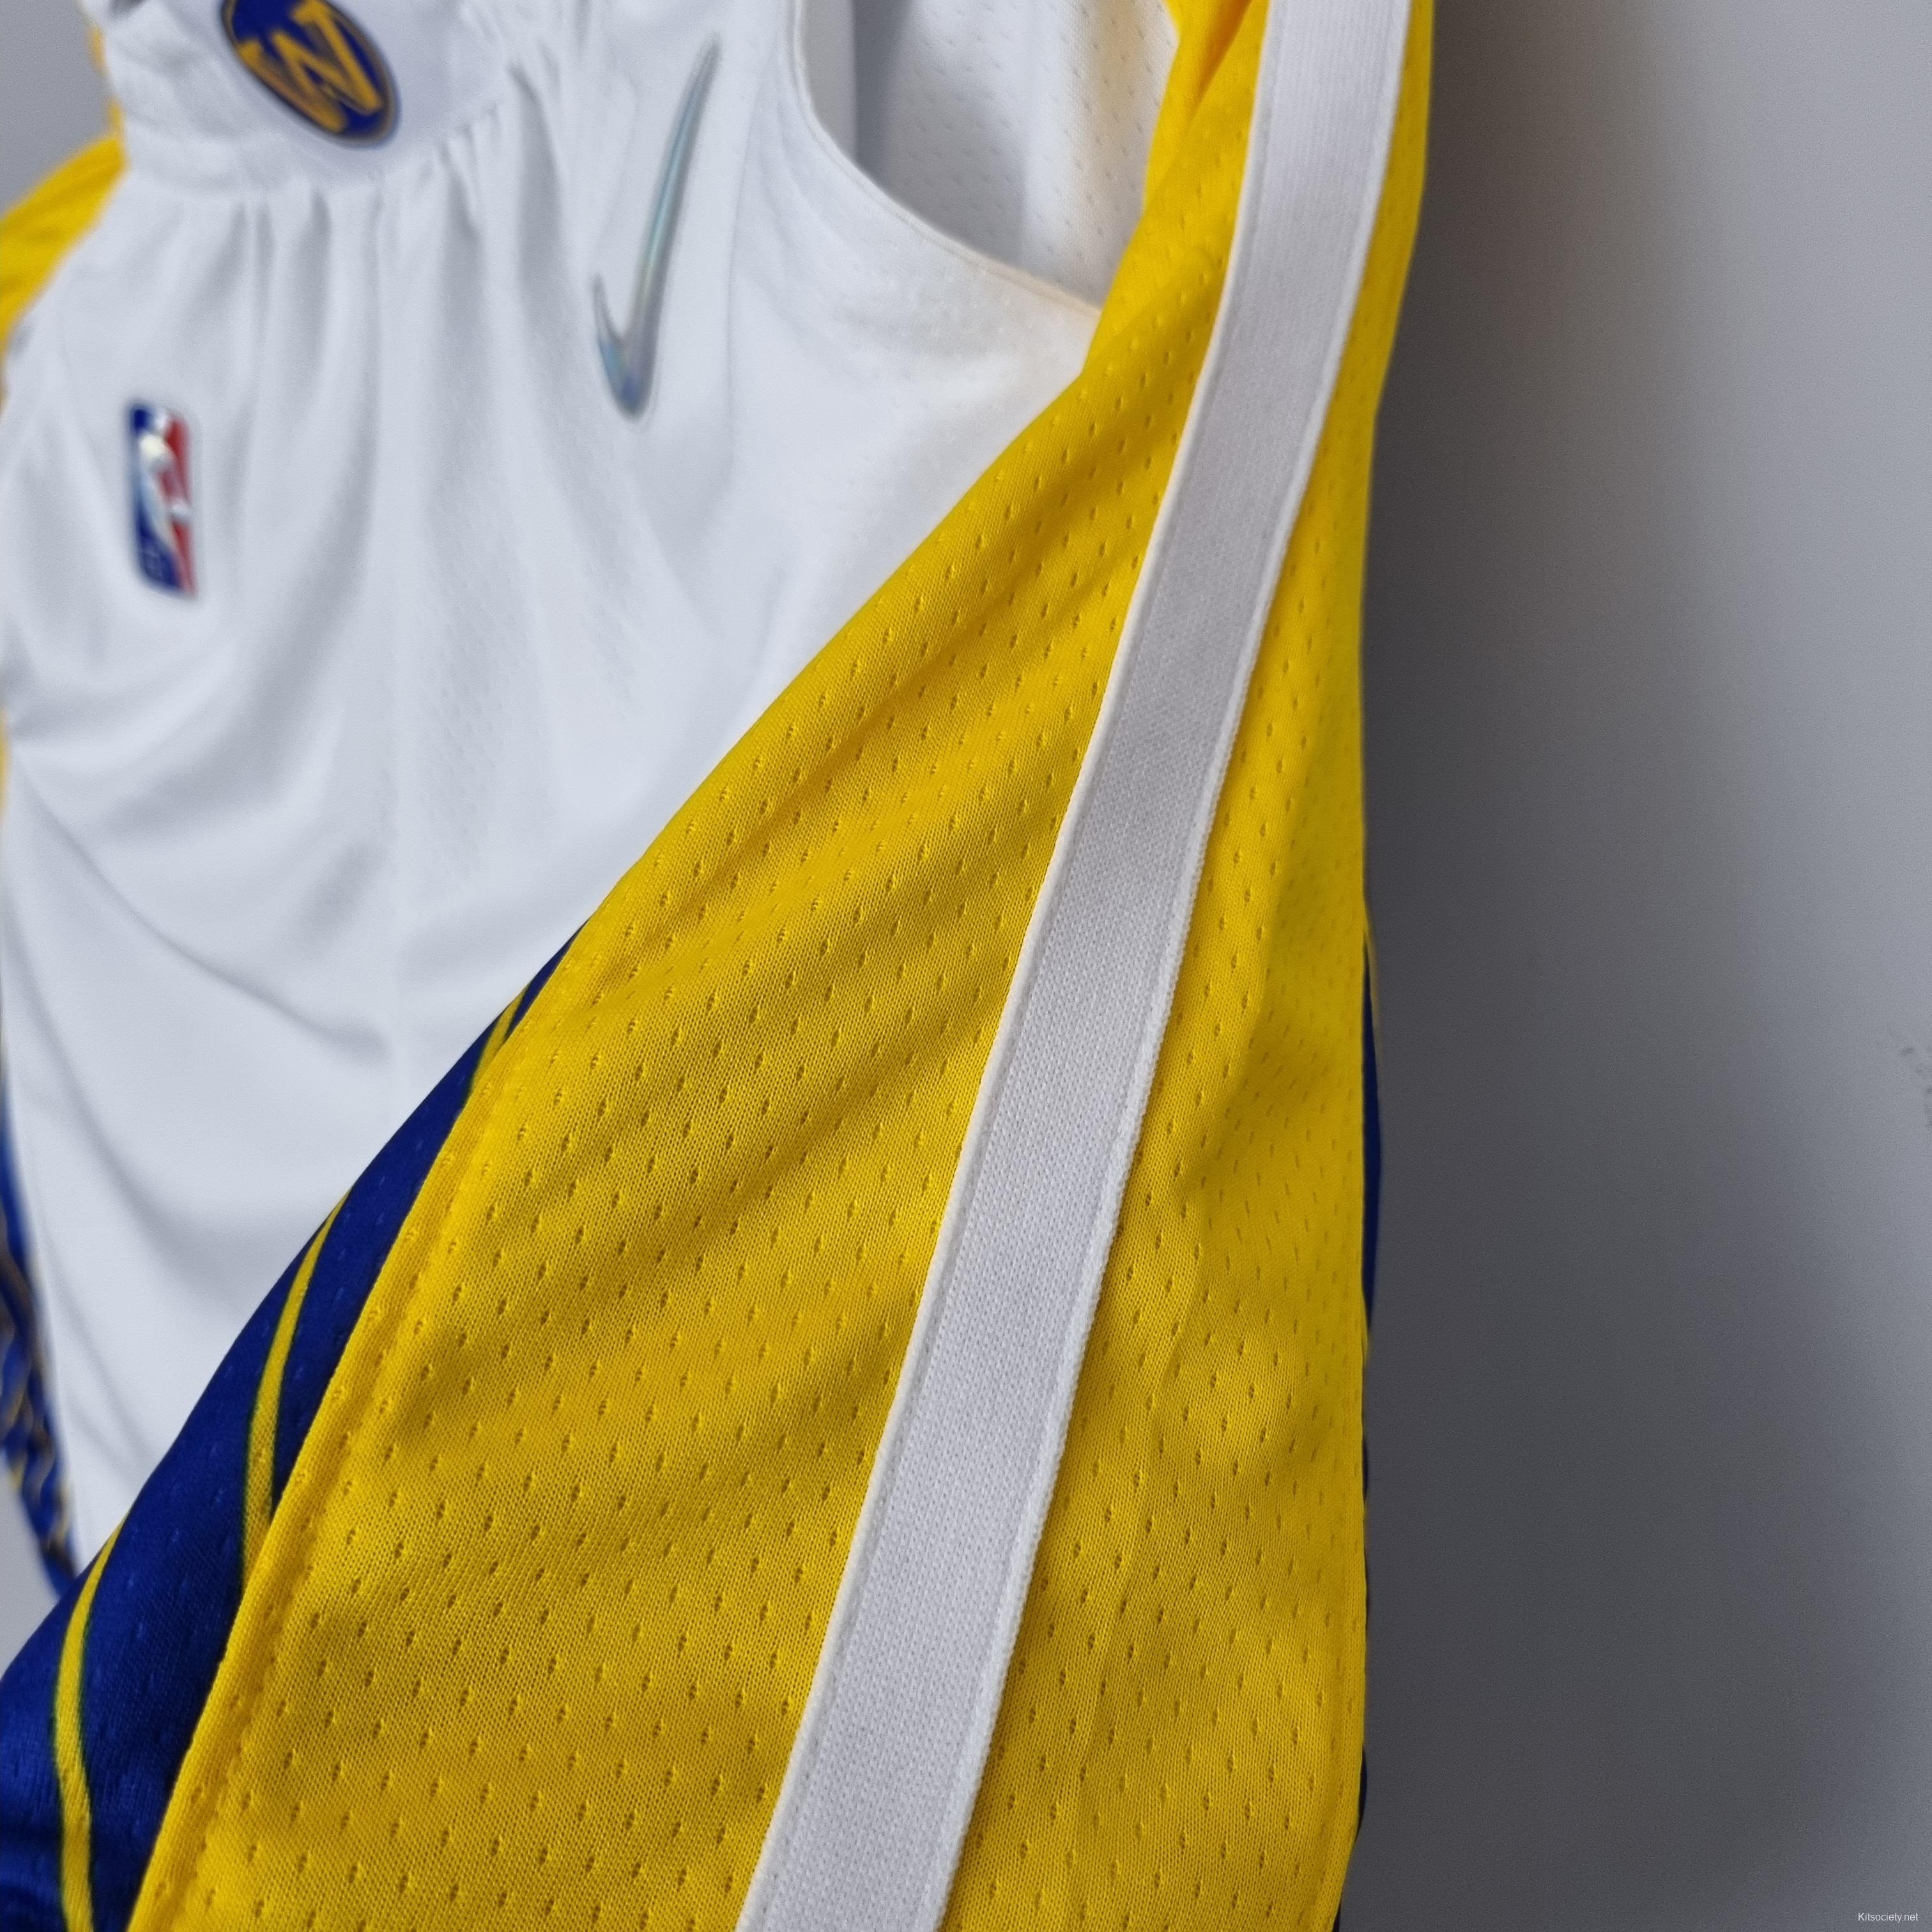  Golden State Warriors Youth Shorts